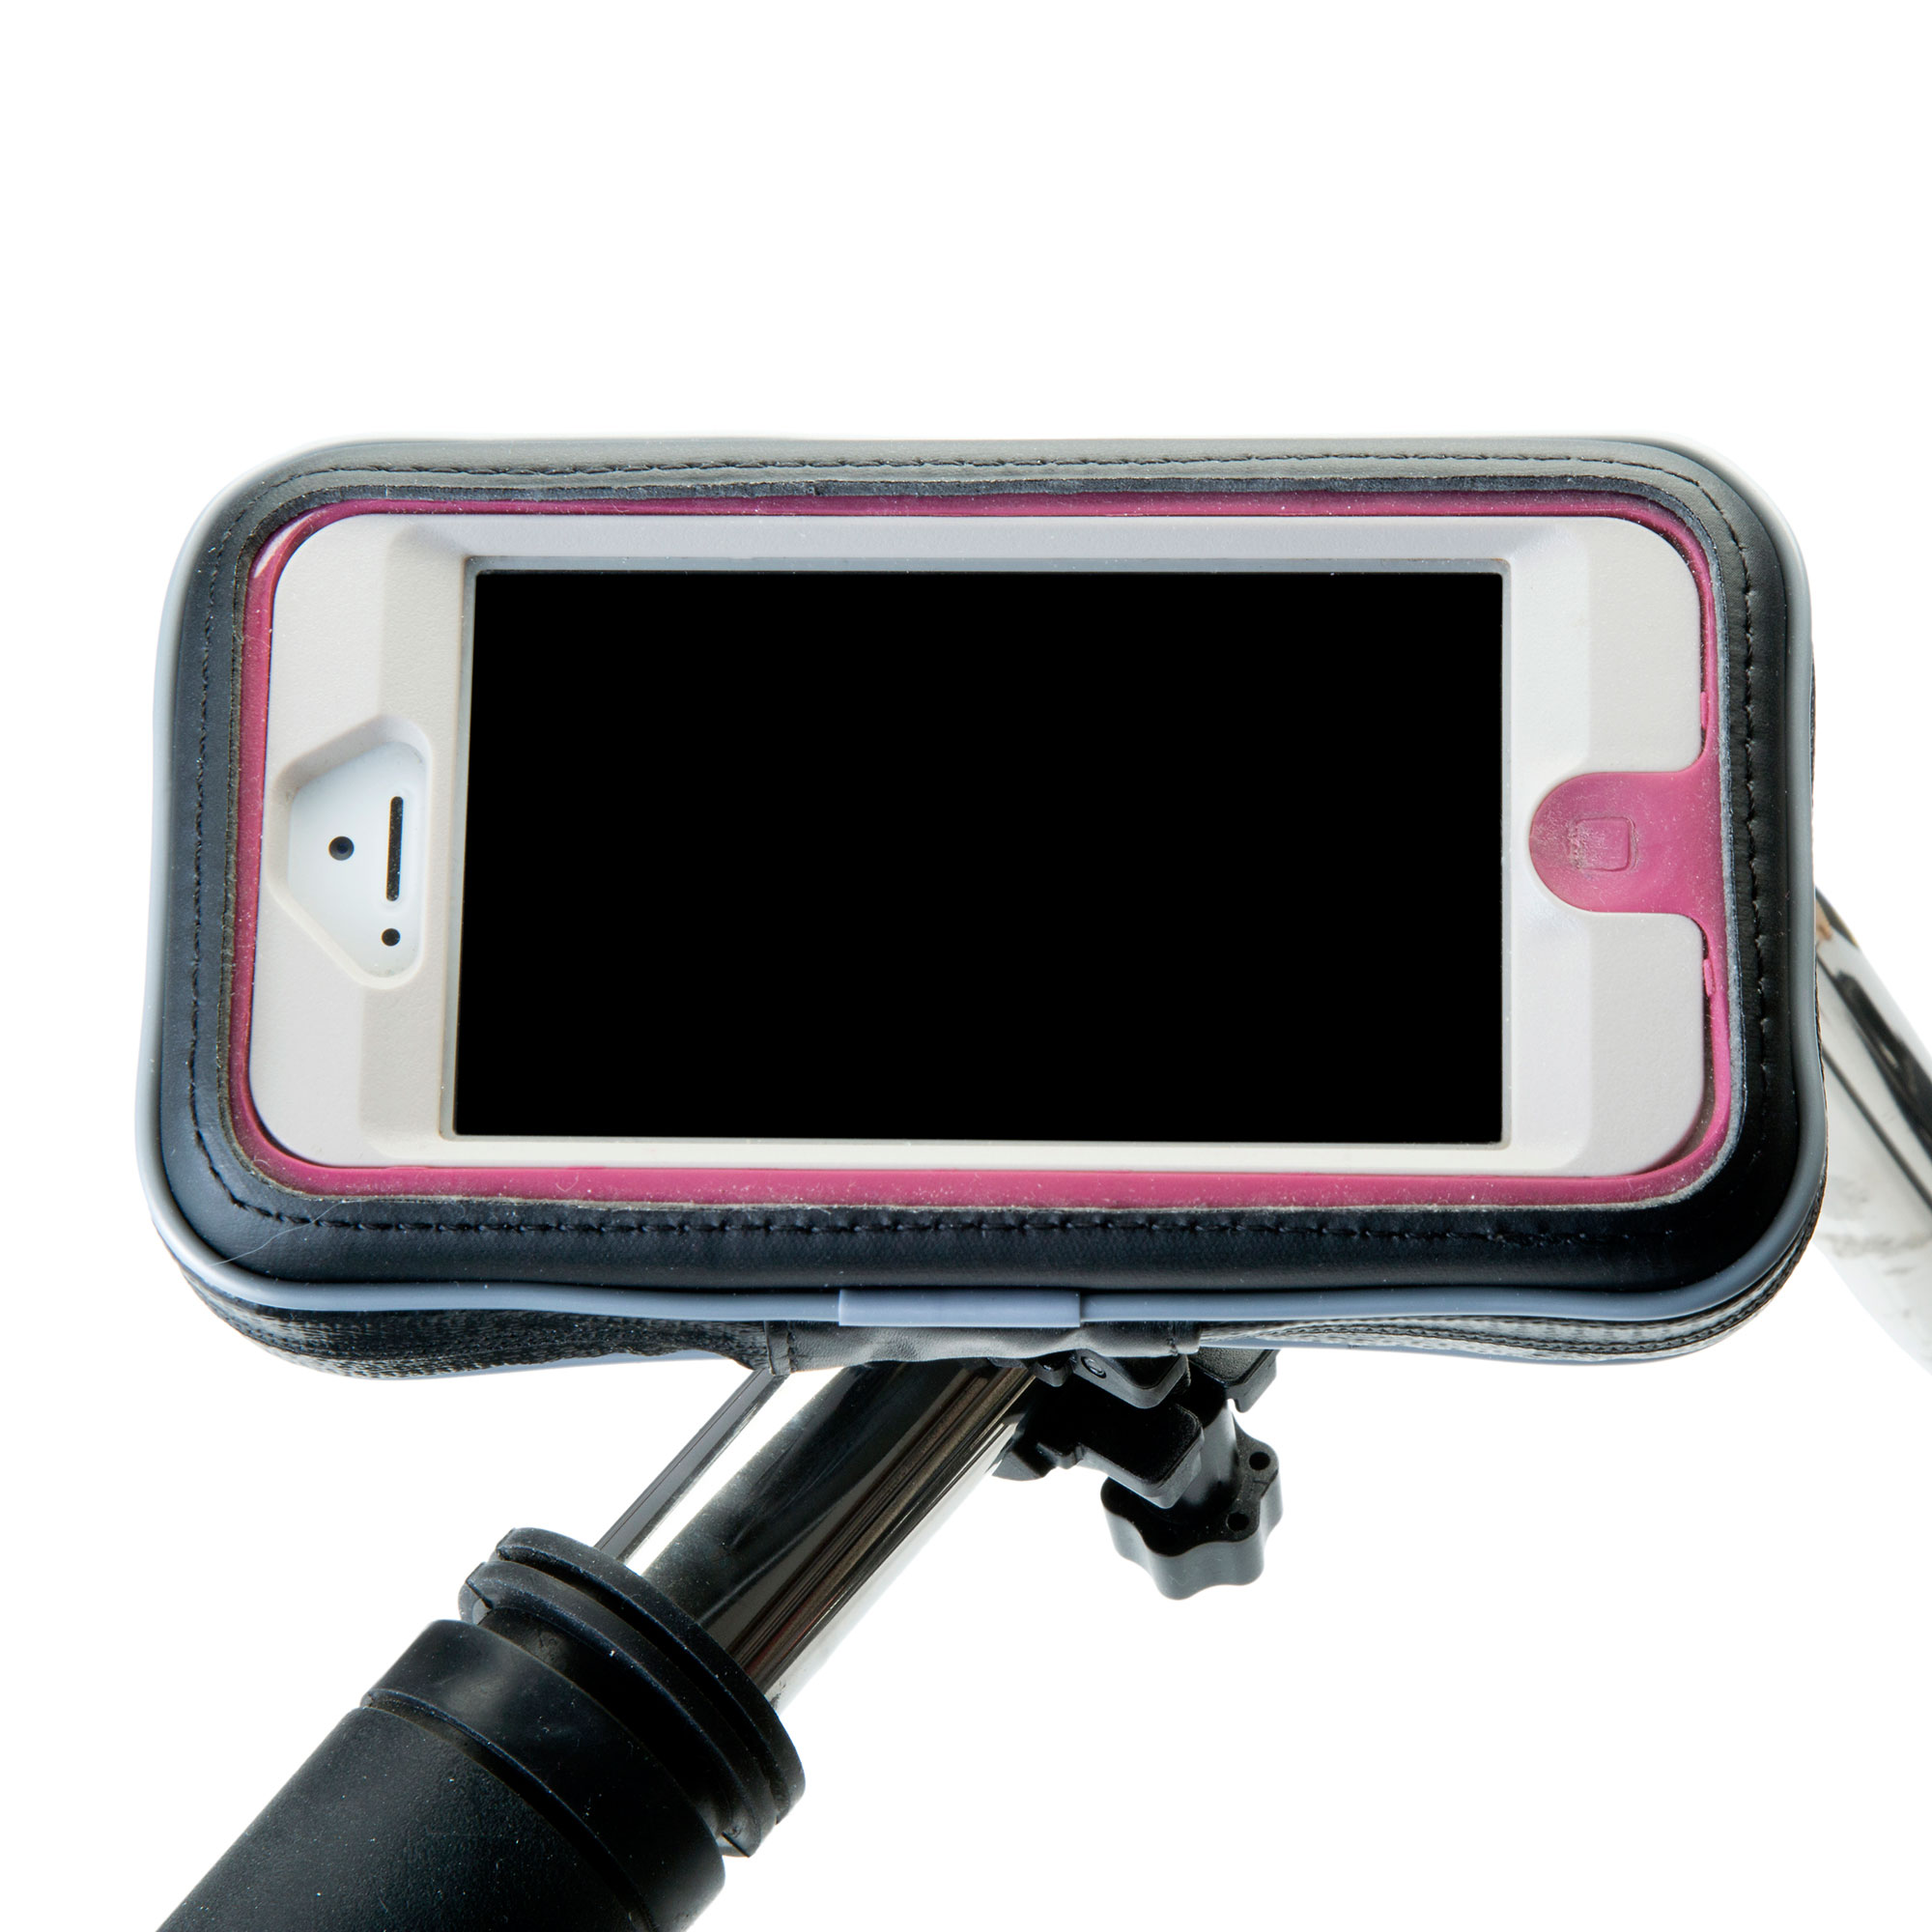 Heavy Duty Weather Resistant Bicycle / Motorcycle Handlebar Mount Holder Designed for the Sony Ericsson Xperia Play